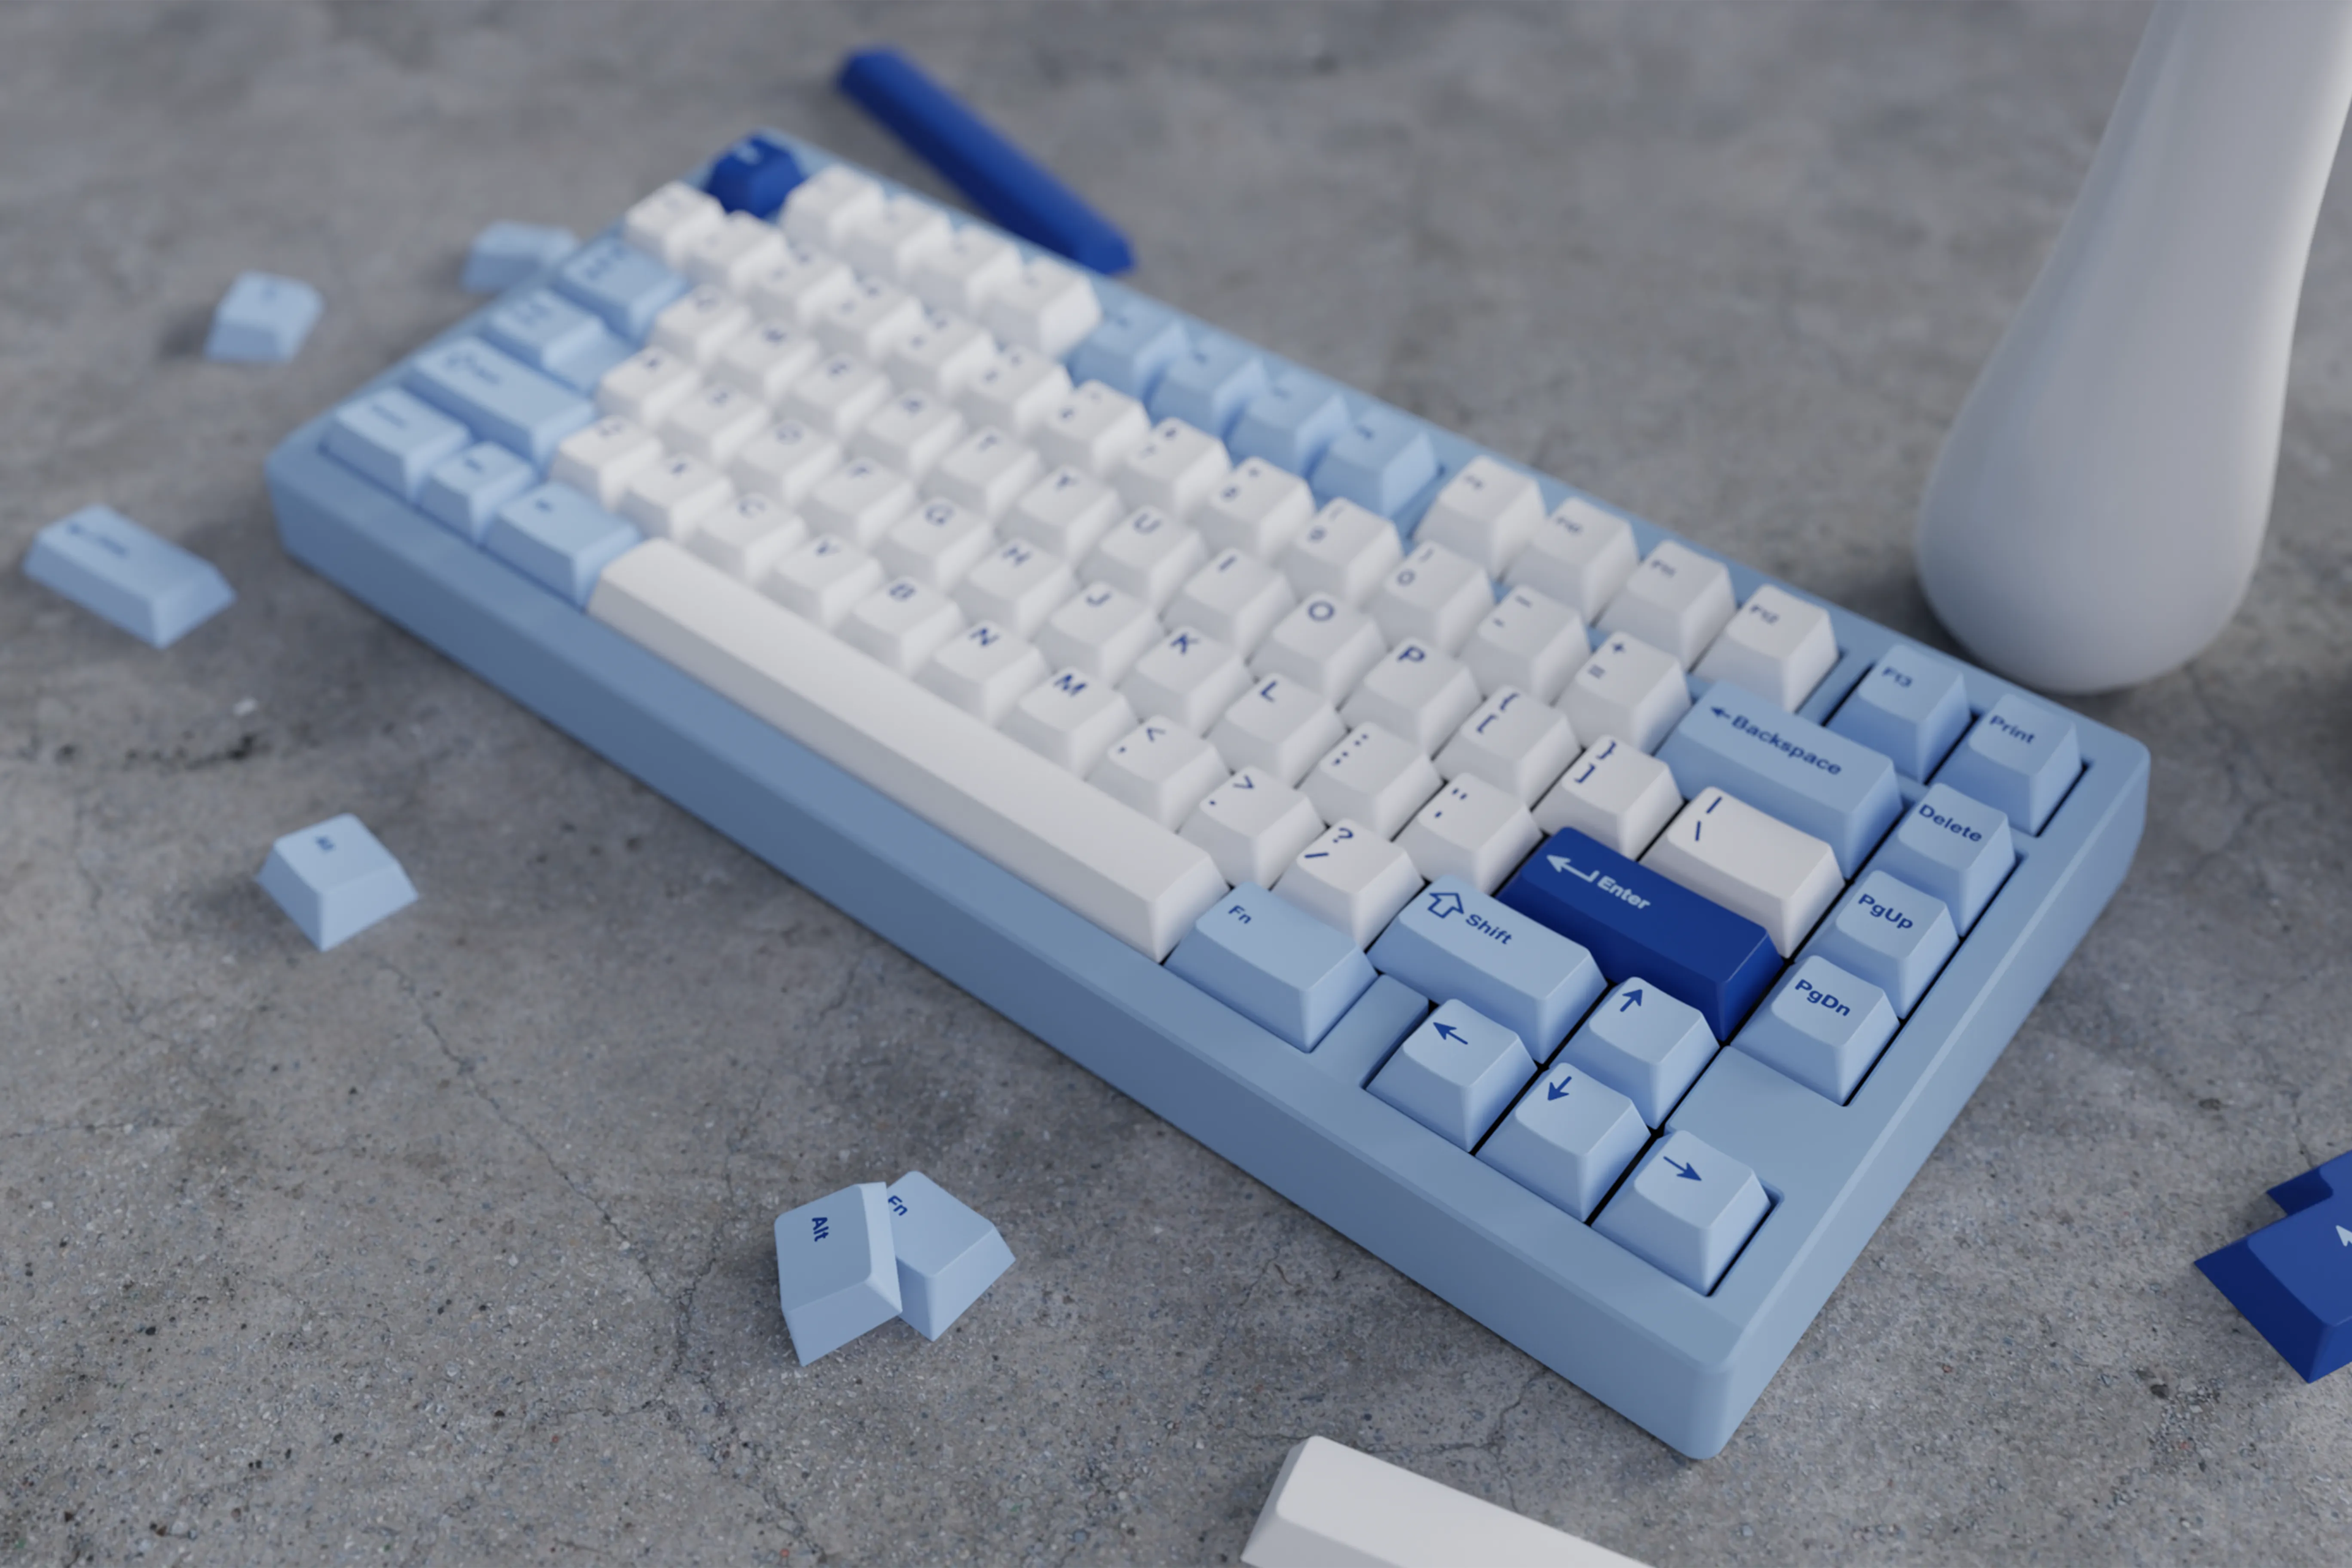 Image for [Group-Buy] Wuque Studio - Keycap Sets